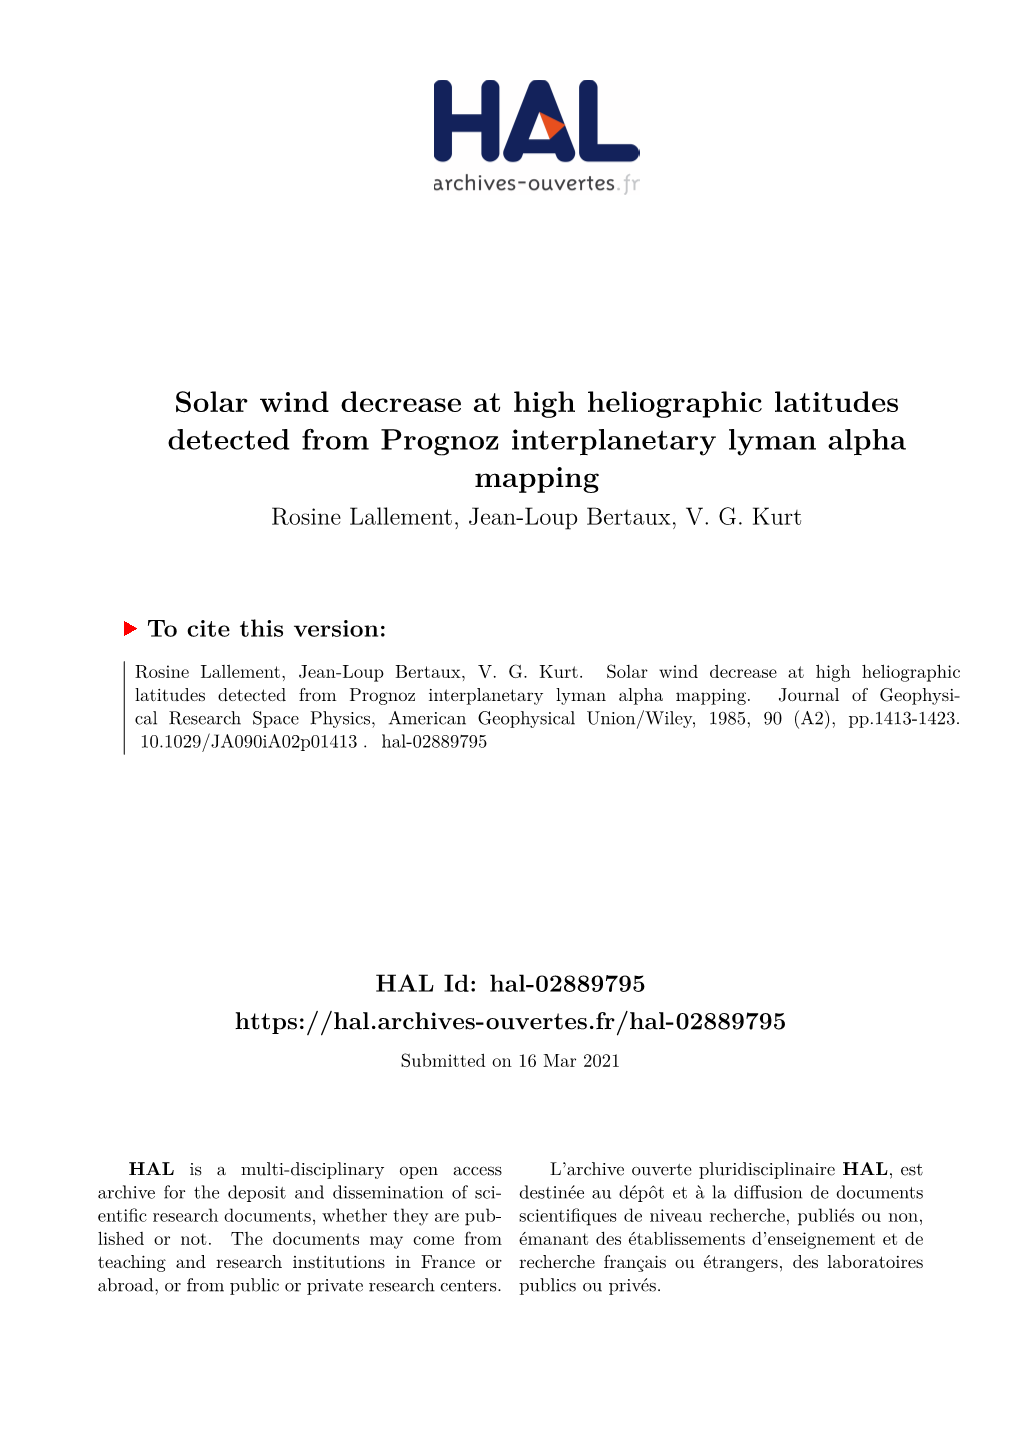 Solar Wind Decrease at High Heliographic Latitudes Detected from Prognoz Interplanetary Lyman Alpha Mapping Rosine Lallement, Jean-Loup Bertaux, V